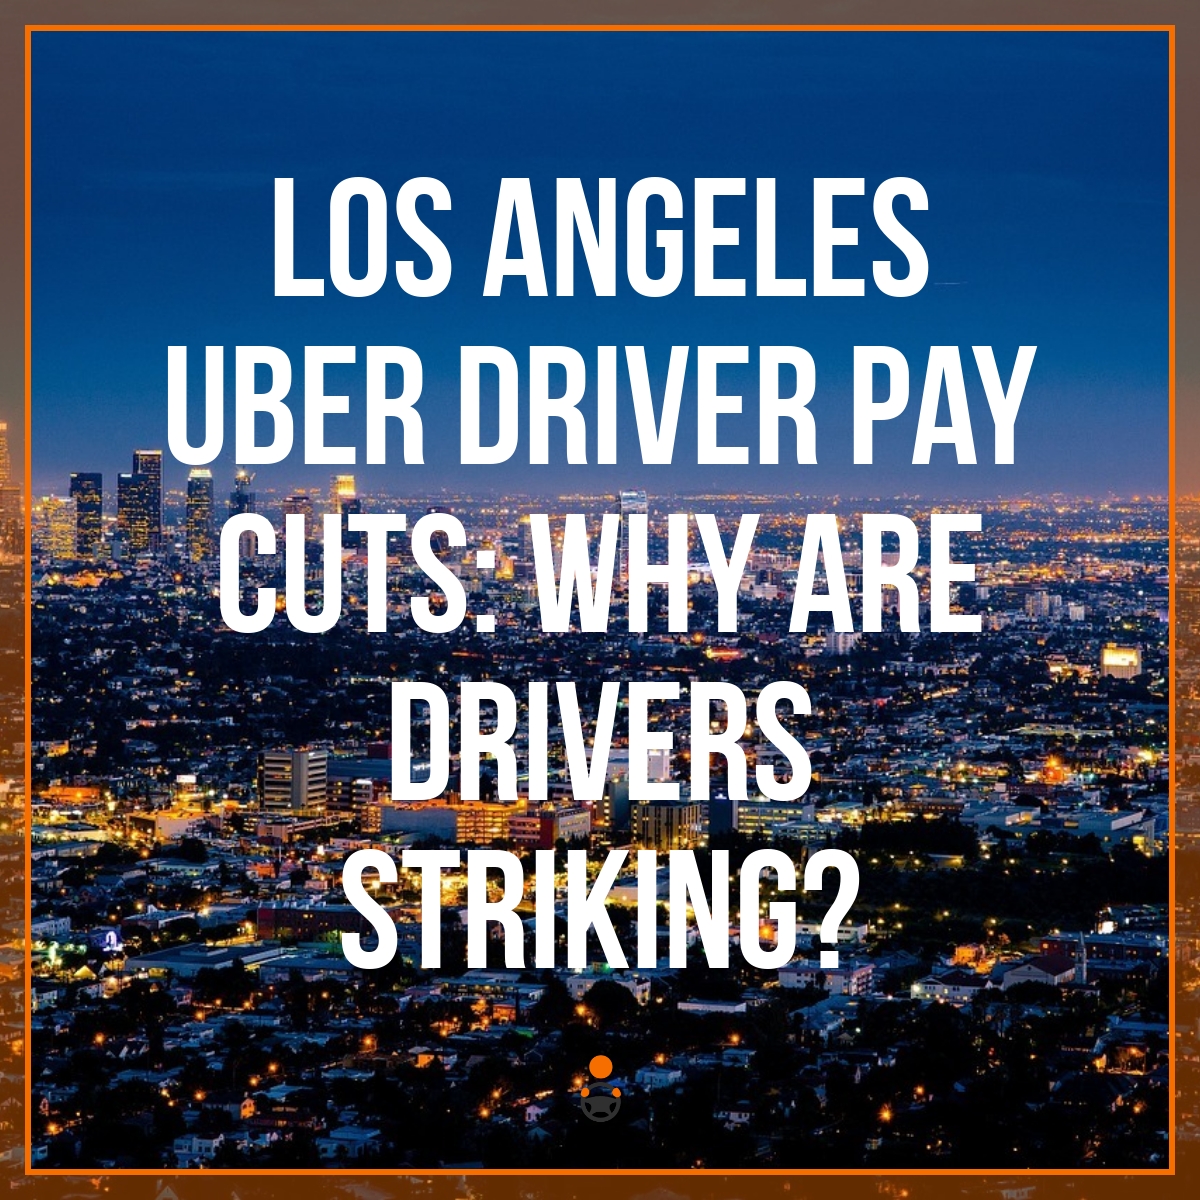 Los Angeles Uber Driver Pay Cuts: Why Are Drivers Striking?